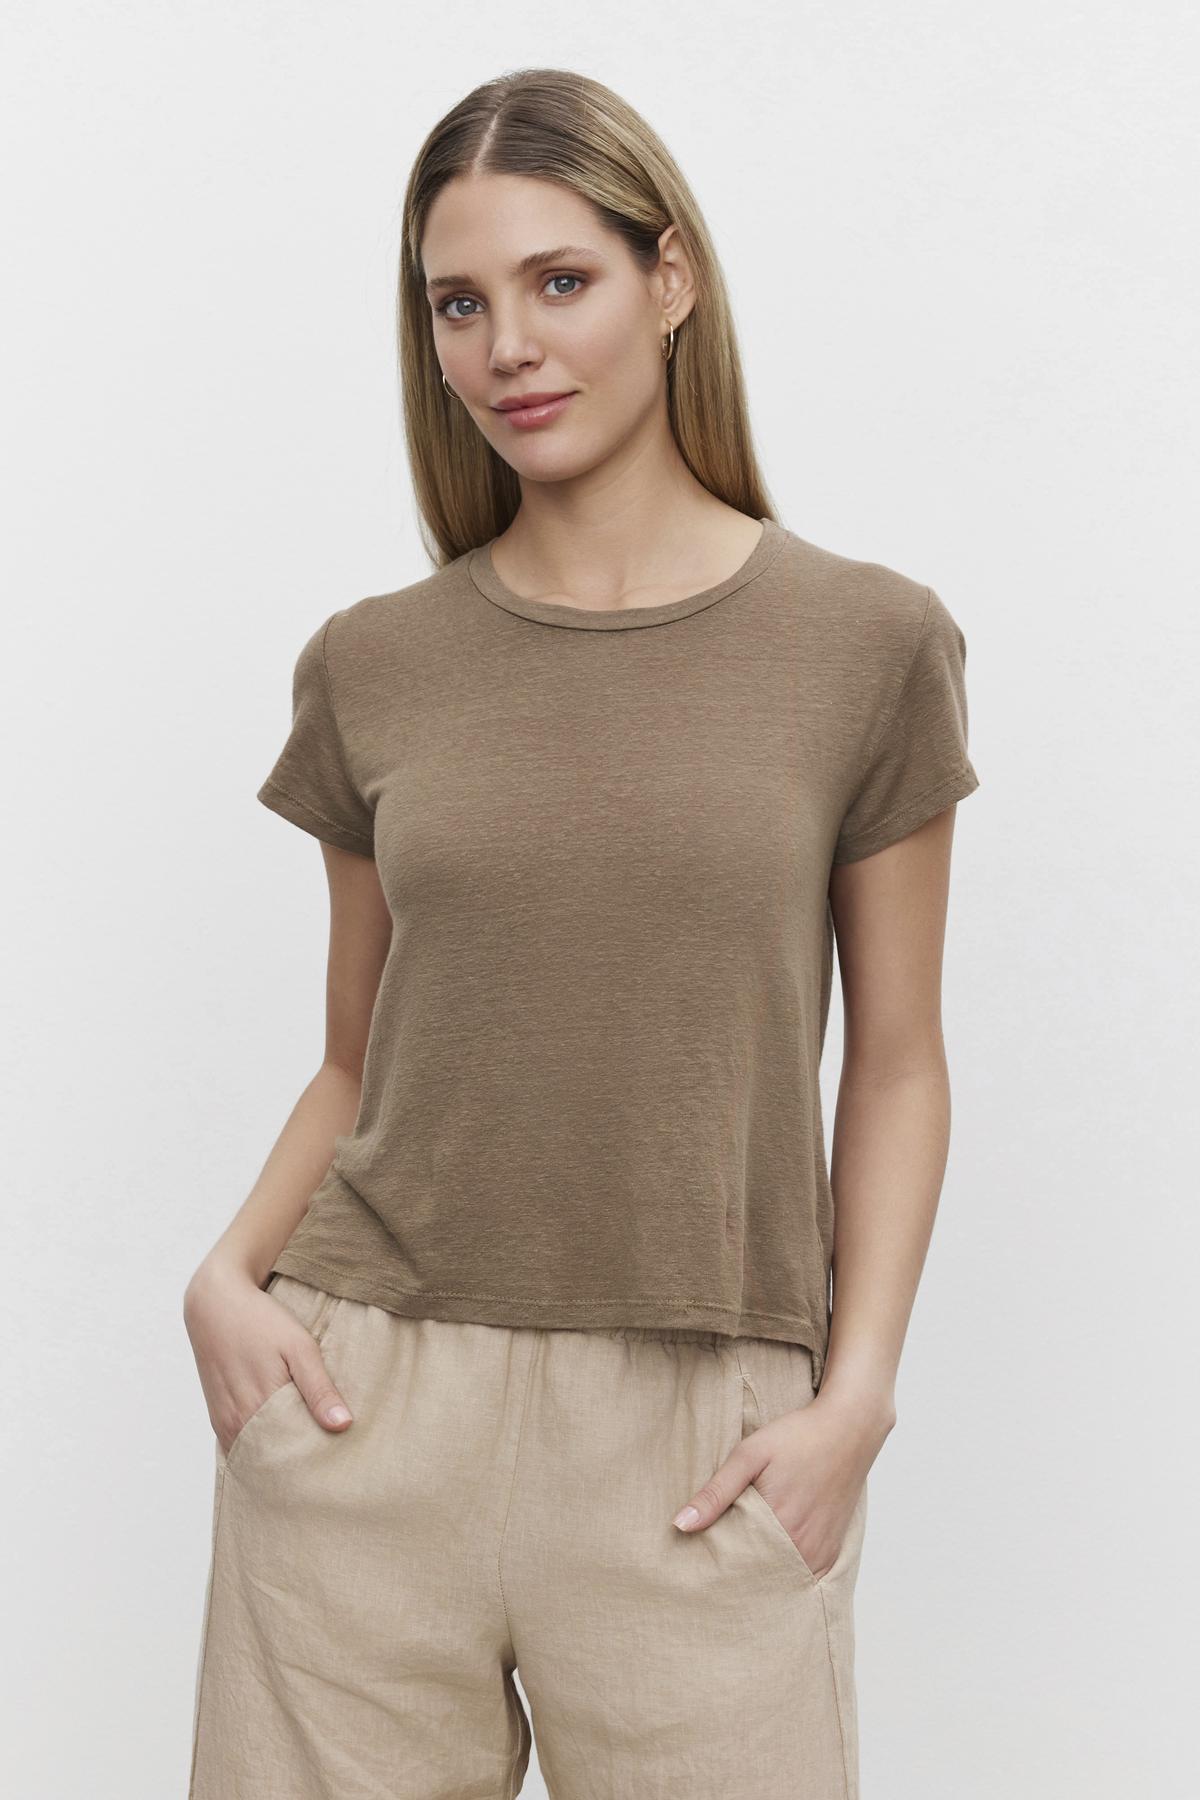 Woman wearing a Velvet by Graham & Spencer CASEY LINEN KNIT CREW NECK TEE and beige pants standing against a white background.-36443547959489